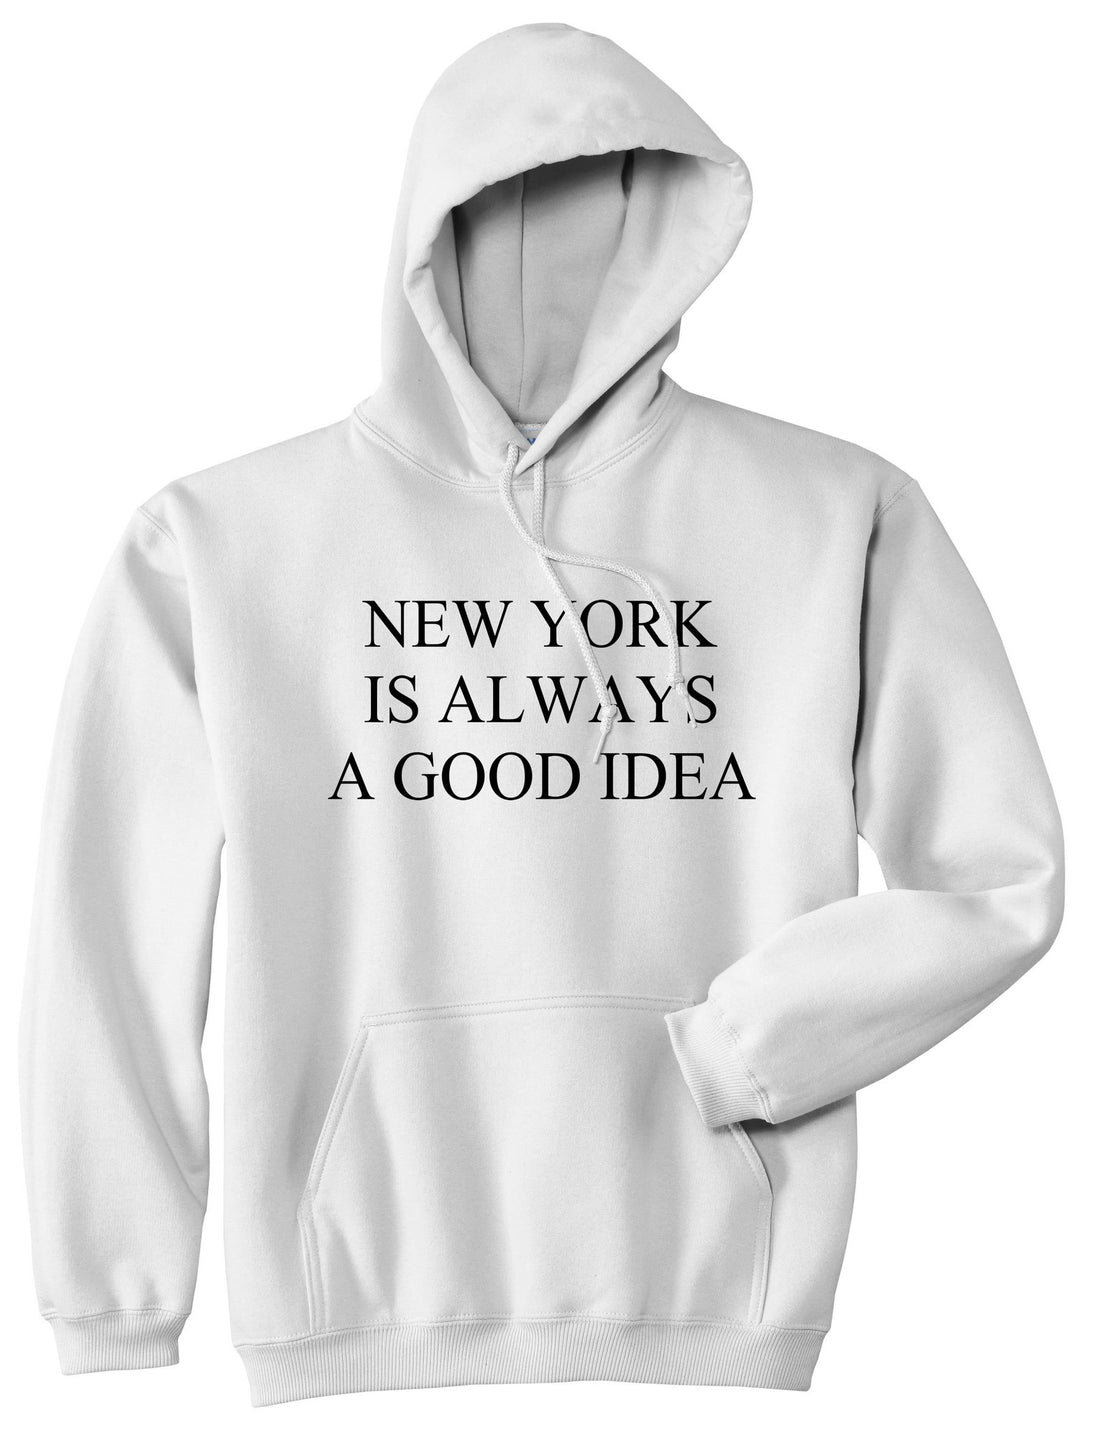 New York Is Always A Good Idea Pullover Hoodie Hoody in White by Kings Of NY